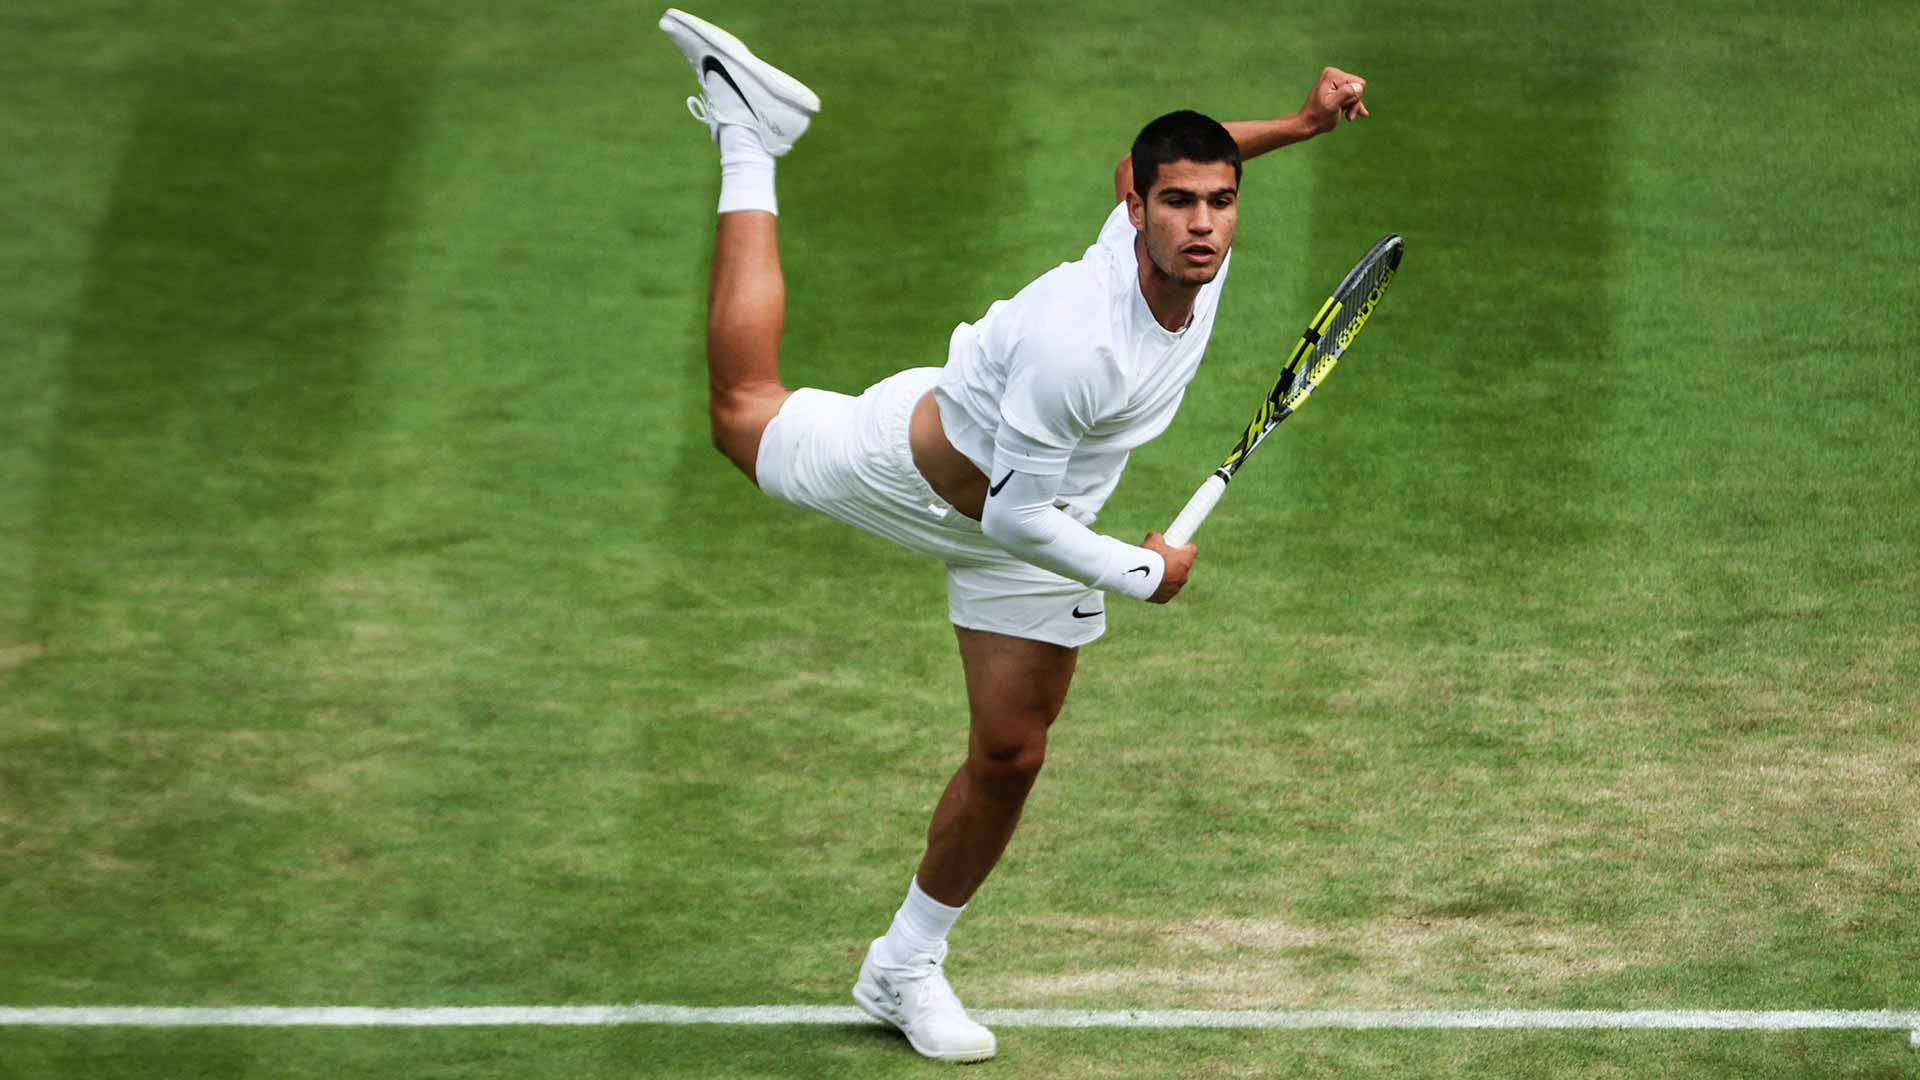 Carlos Alcaraz will face a qualifier in his first match at The Queen's Club.